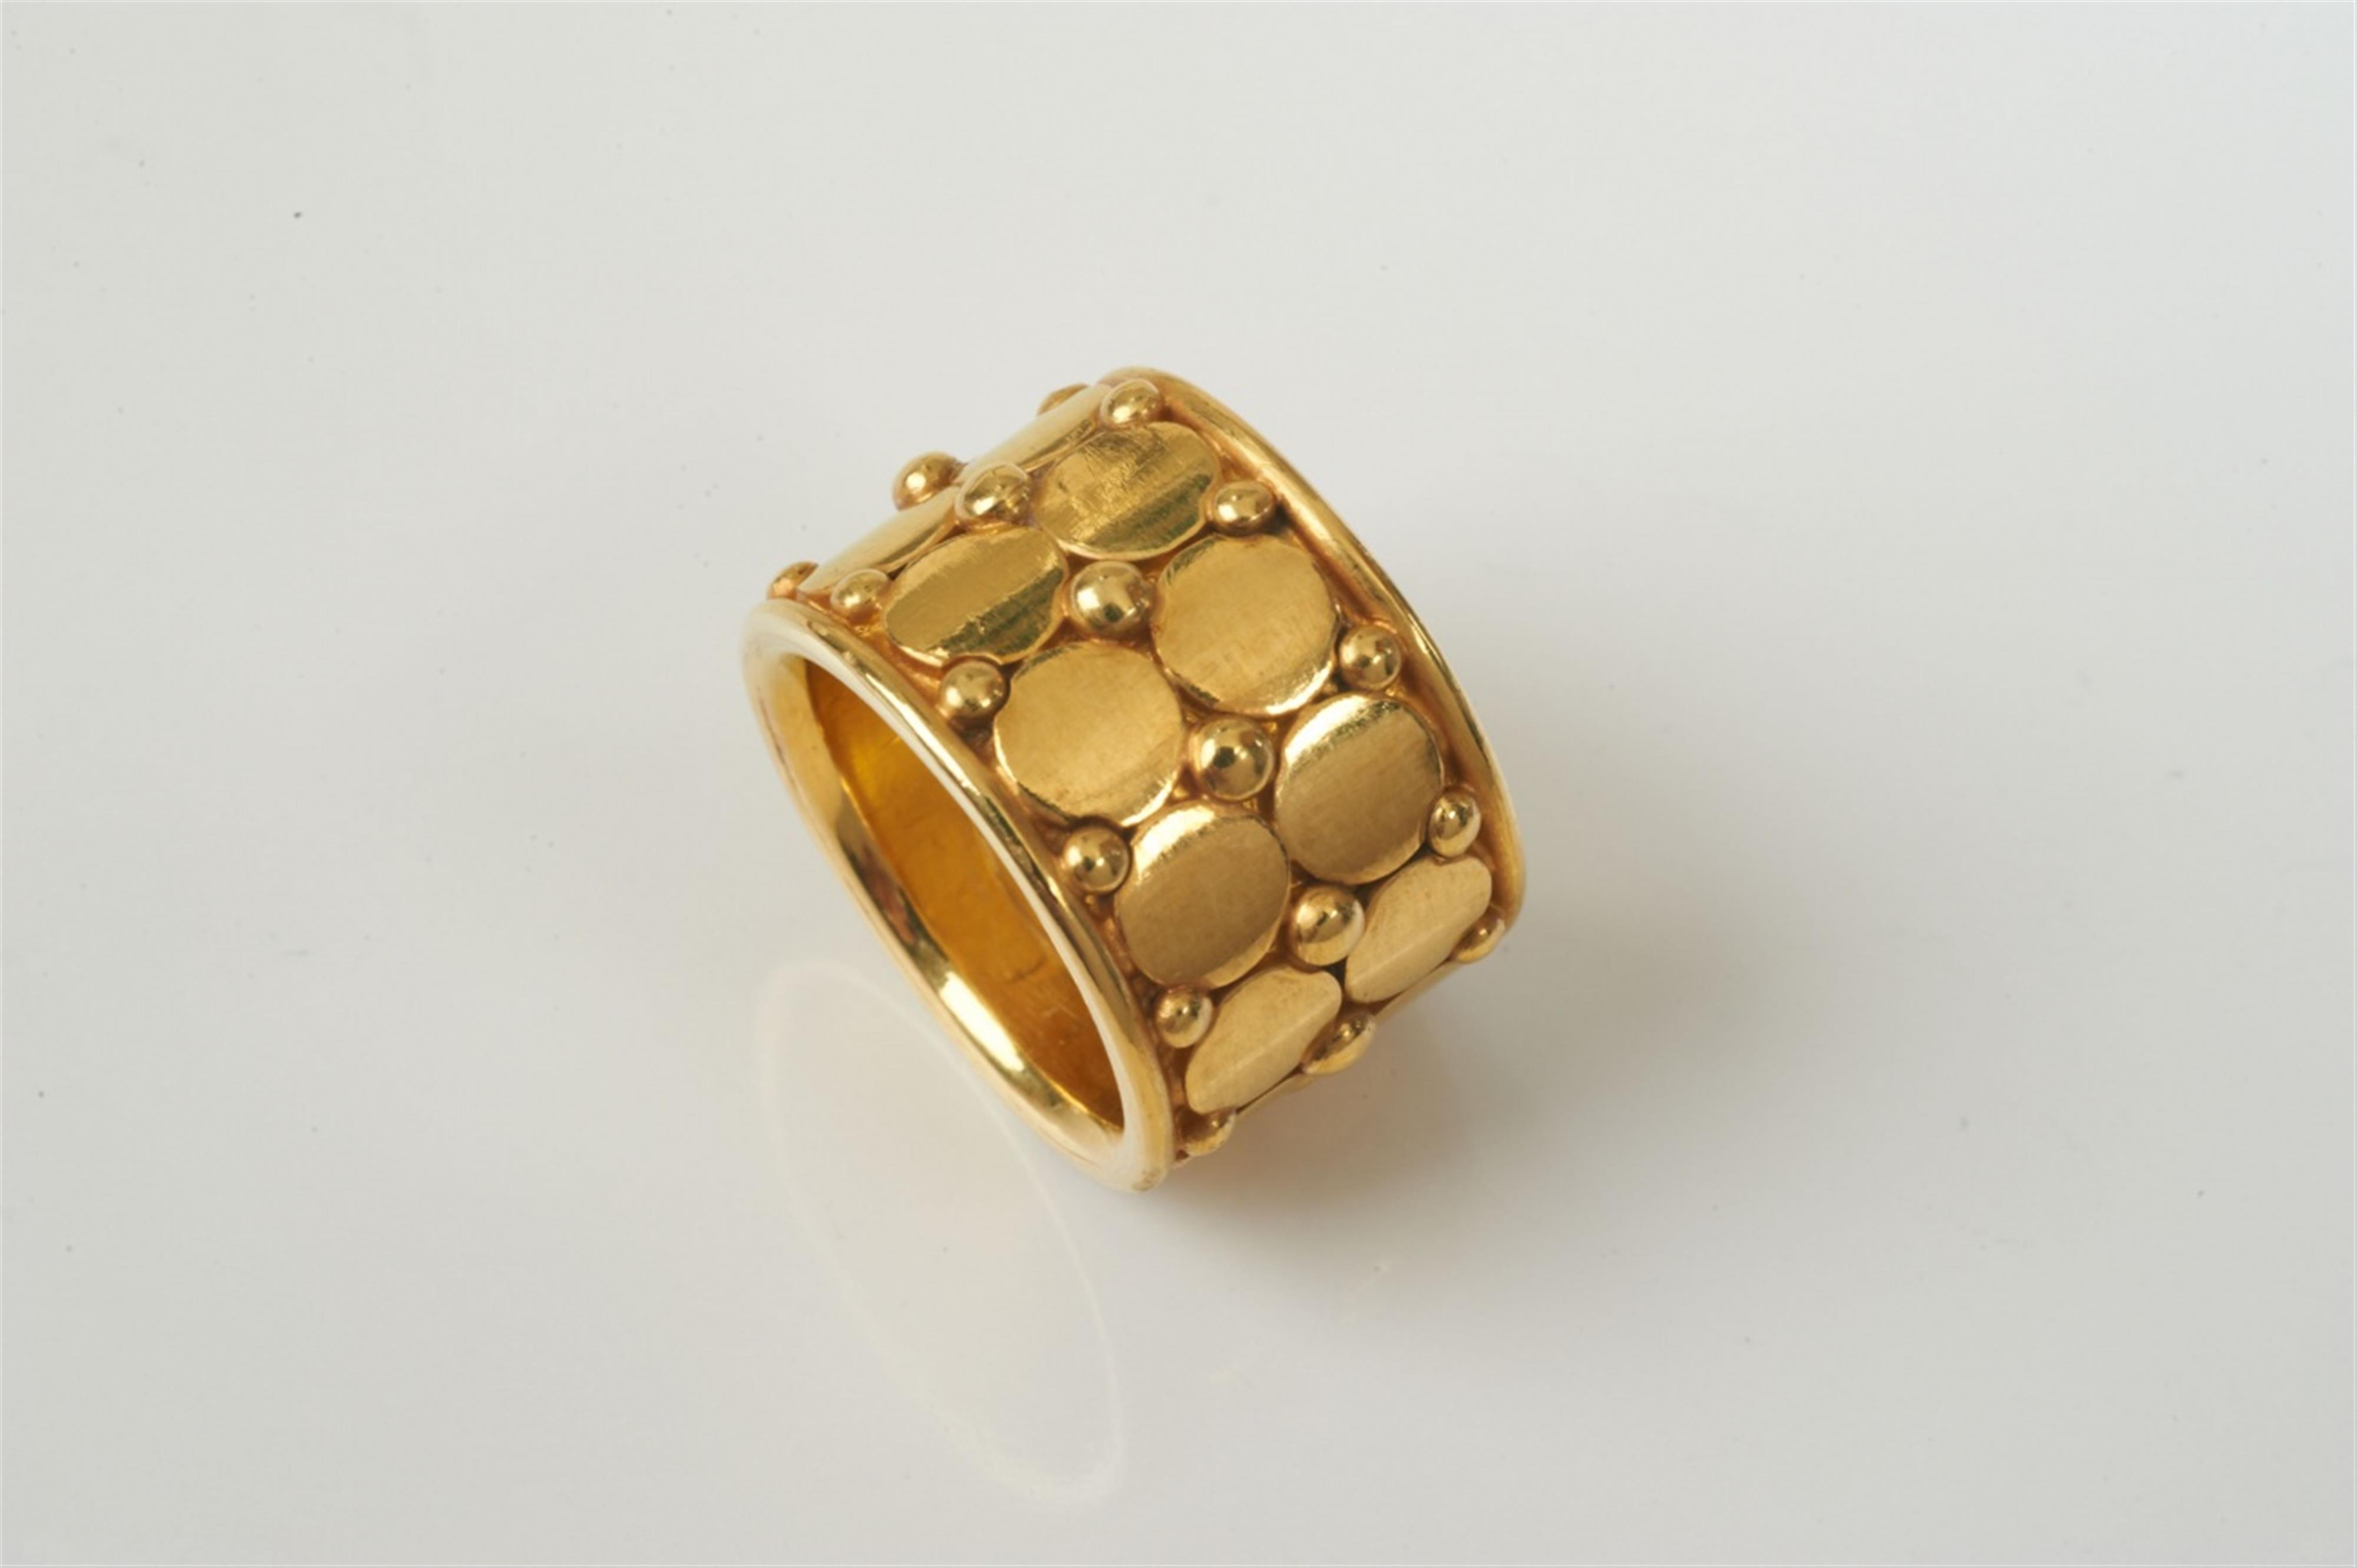 A hand-forged 18k gold ring by Wilhelm Nagel, Cologne - image-1